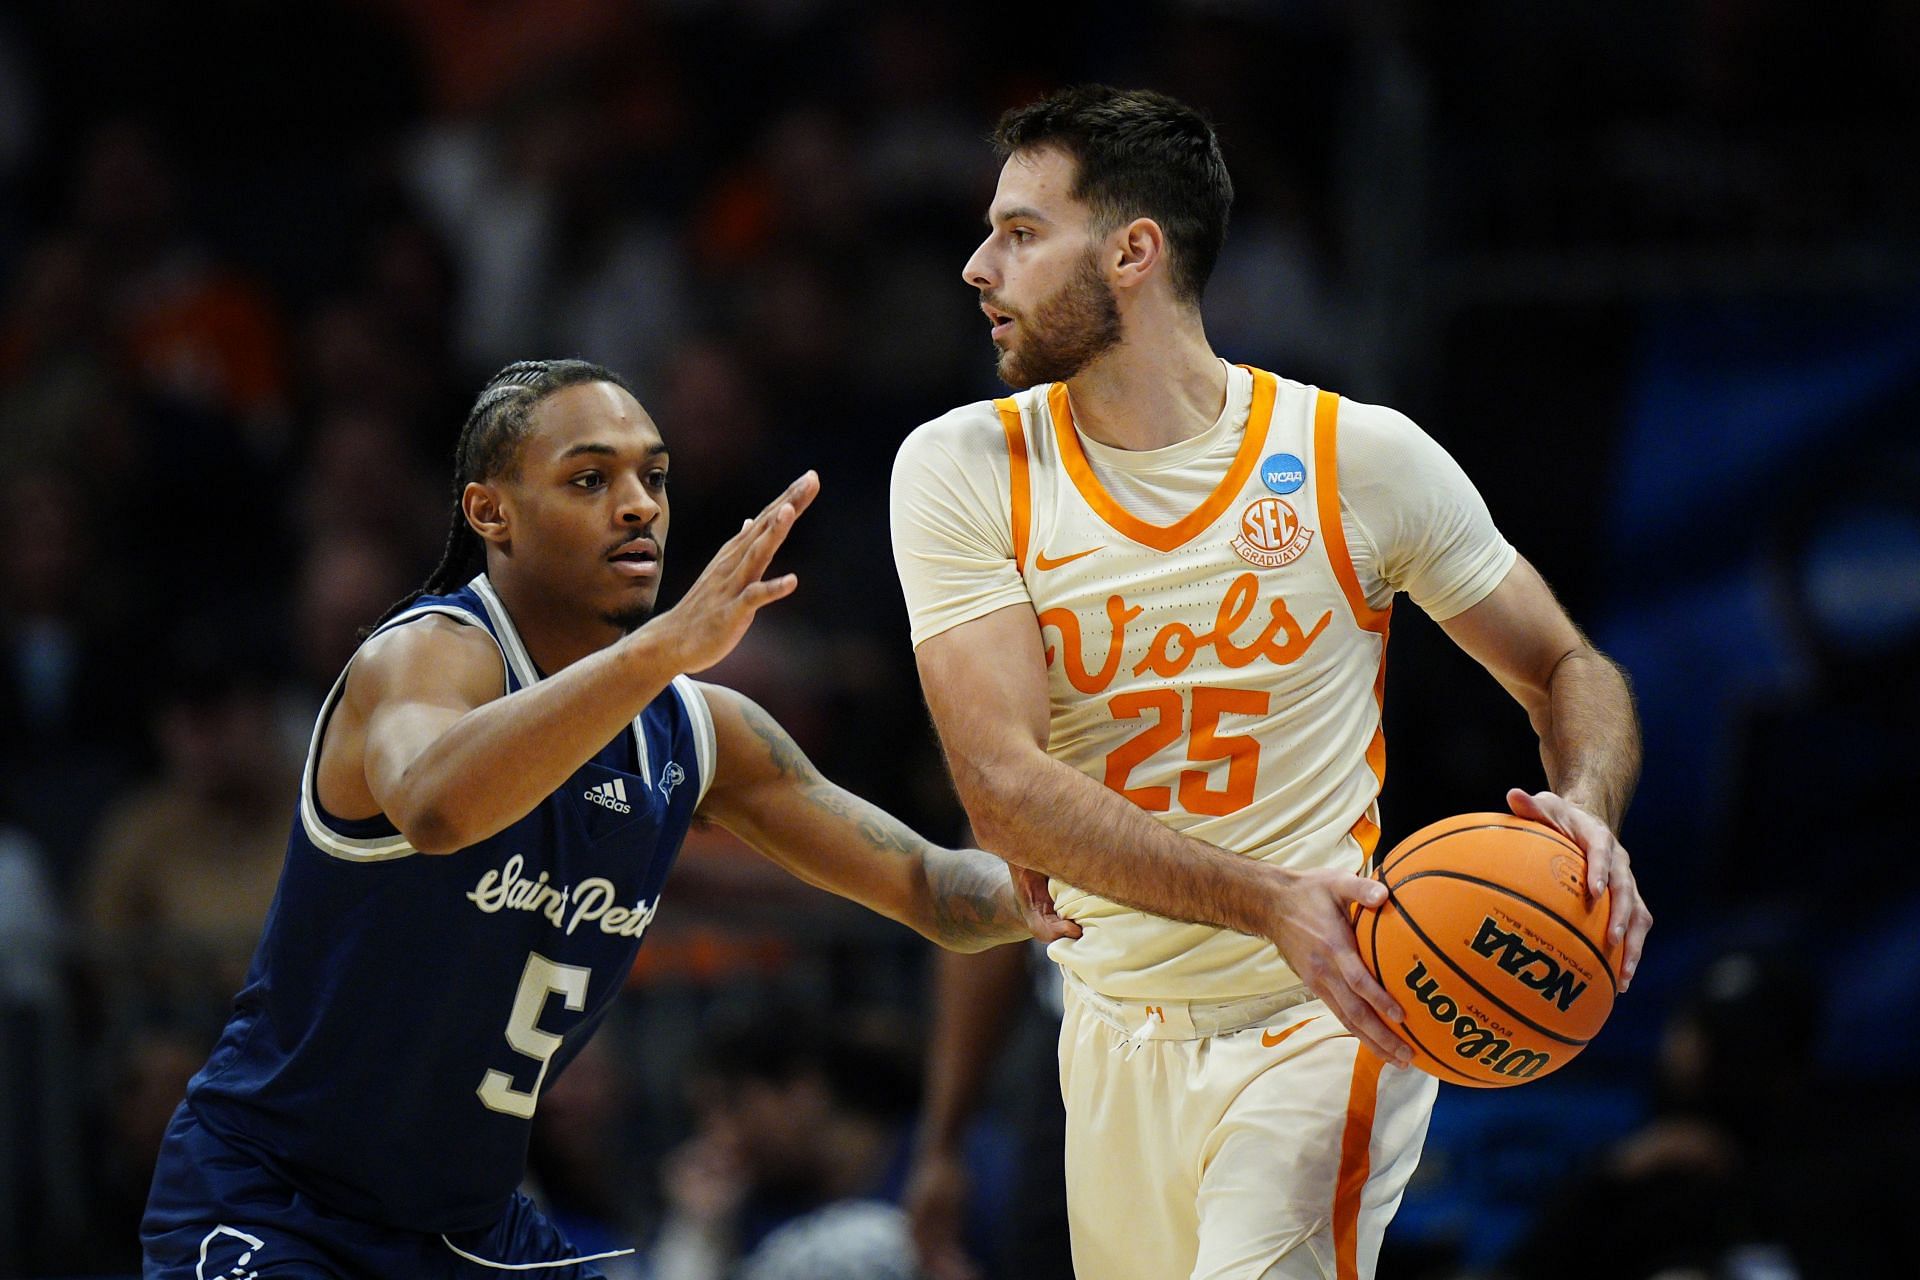 Vescovi hopes to play for Tennessee in its Elite Eight clash with Purdue.